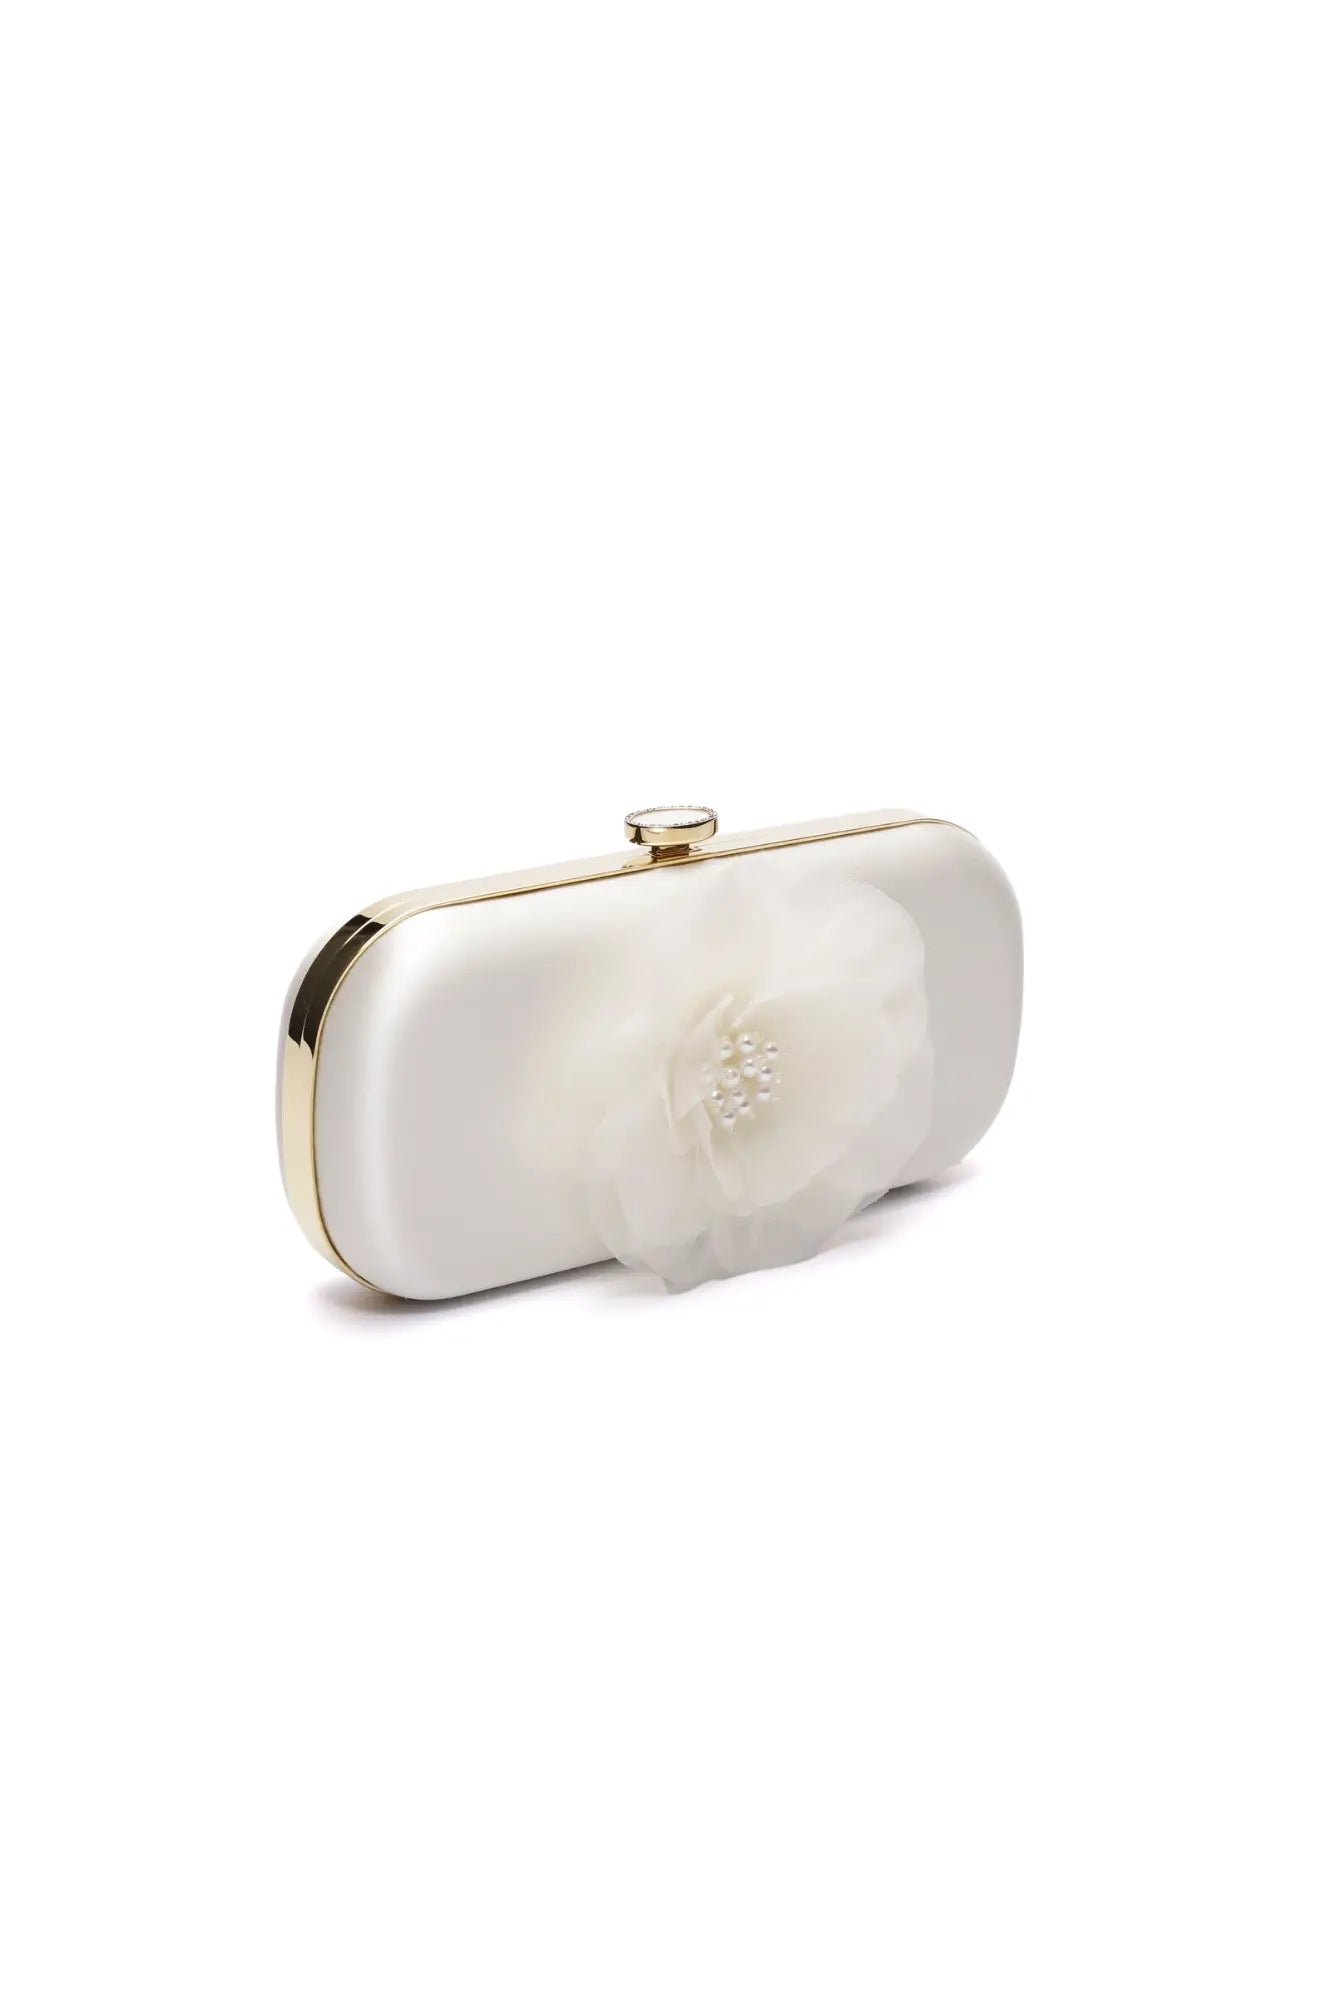 Elegant Bella Fiori Clutch Ivory bridal clutch purse with floral embellishment and gold accents from The Bella Rosa Collection.